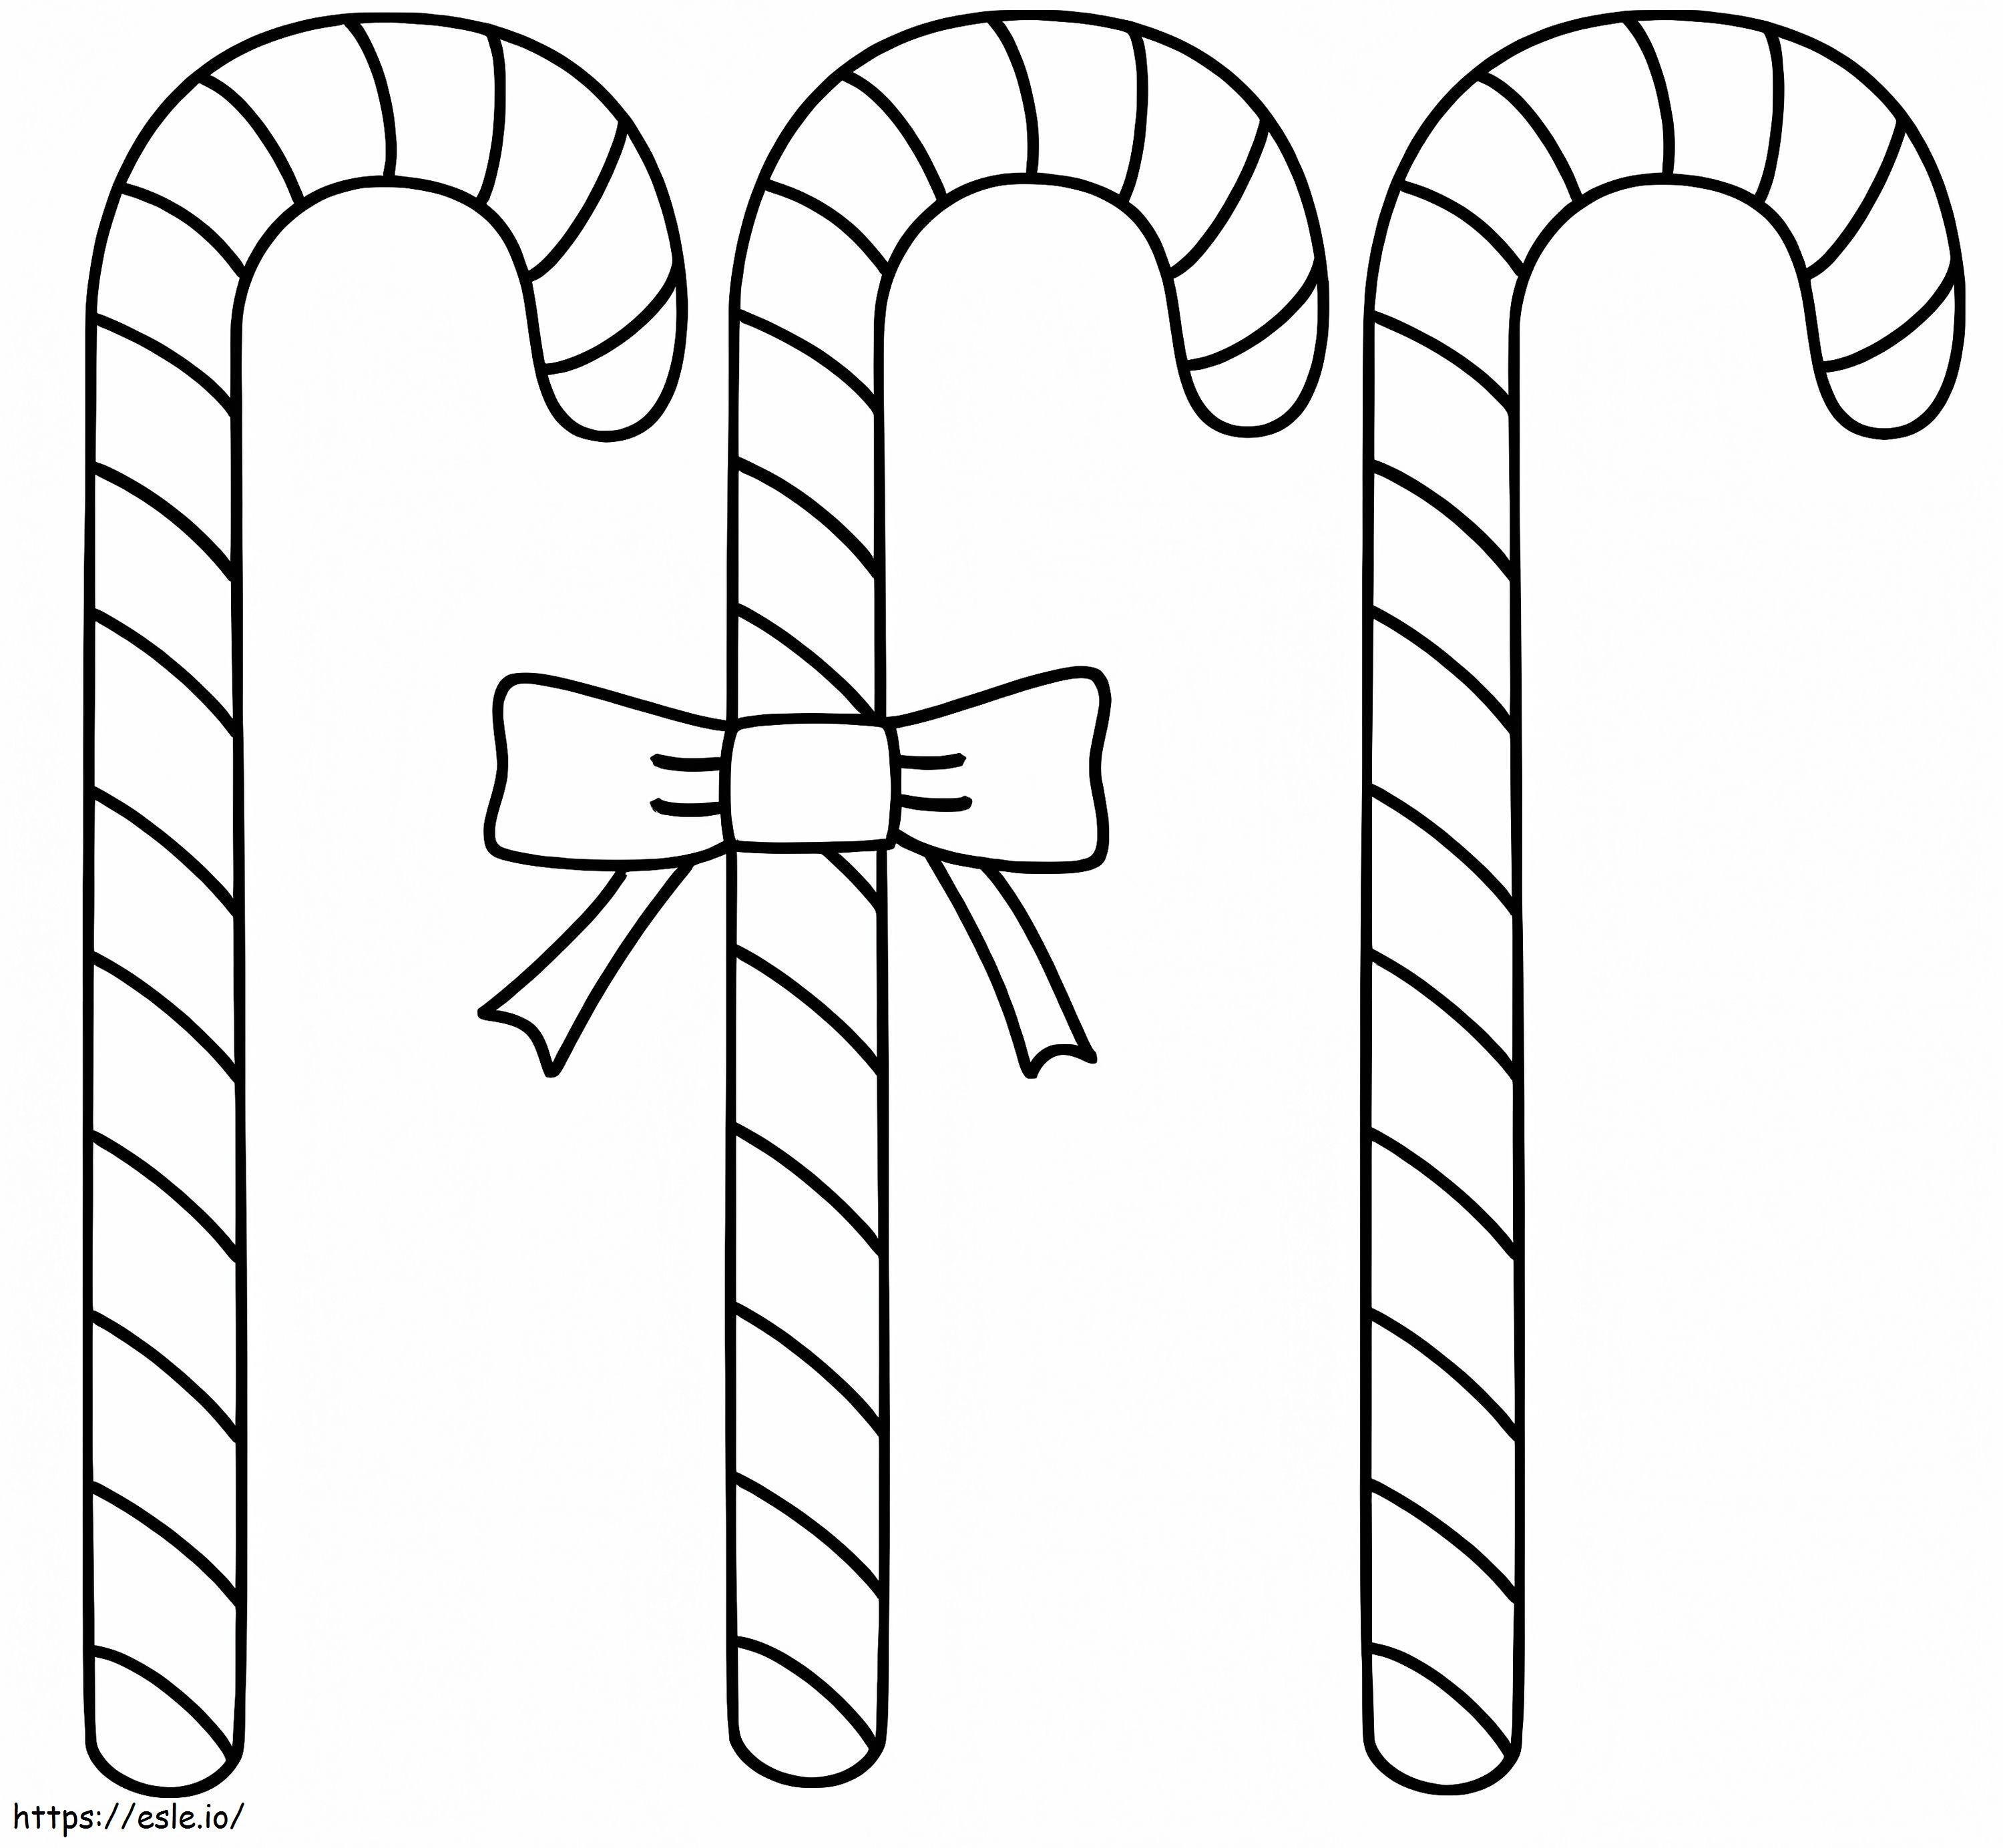 Three Candy Canes coloring page